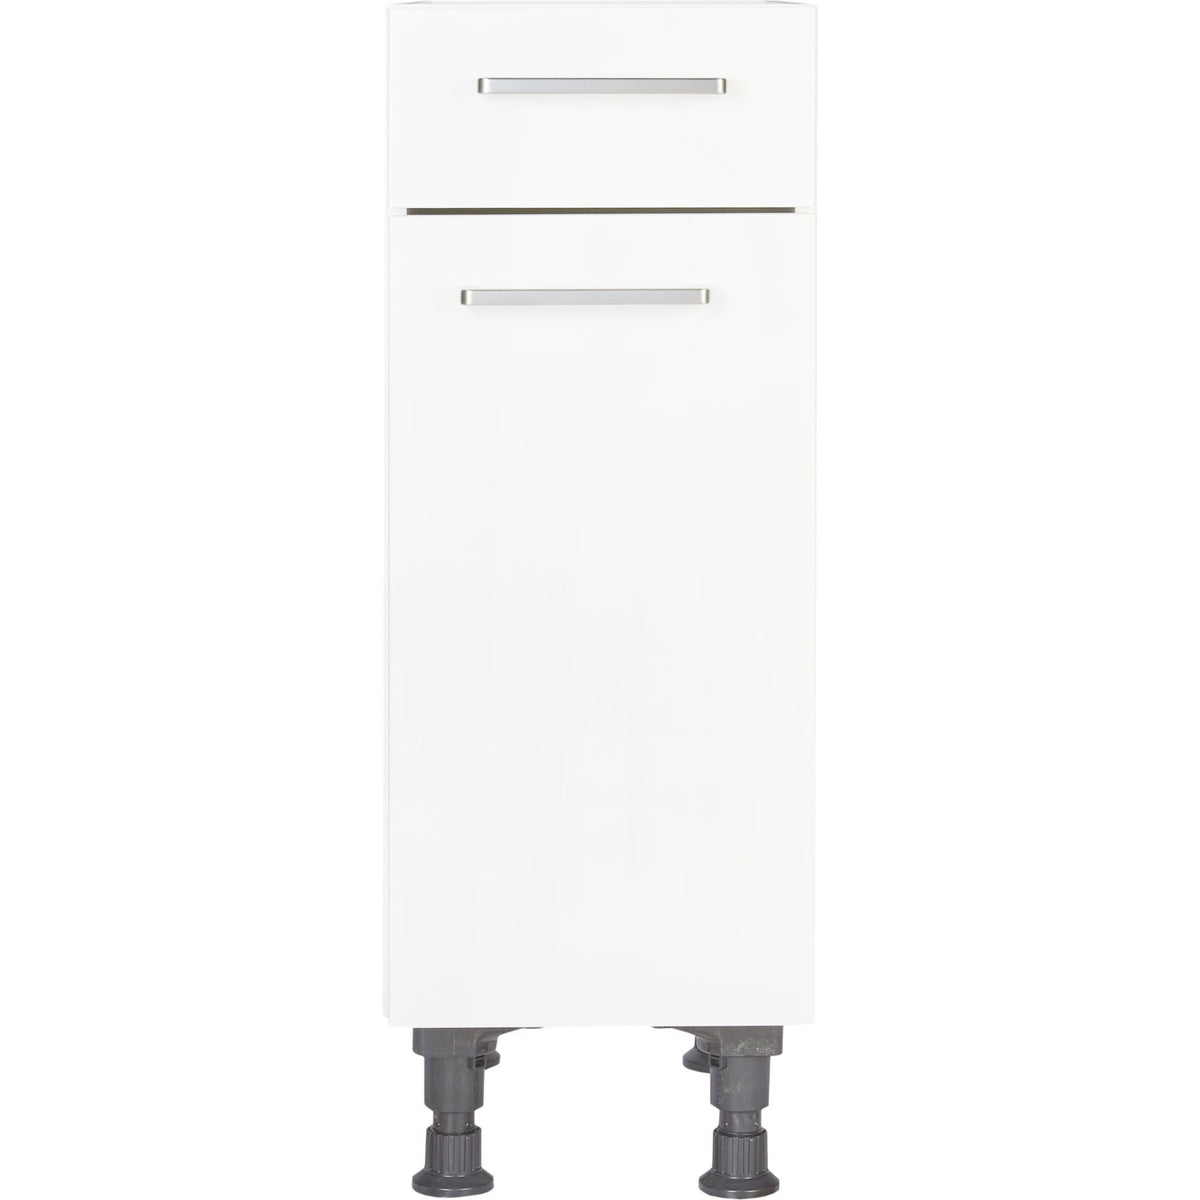 d cabinet white 30cm and kitchen base with 60cm drawer 45cm US nobilia